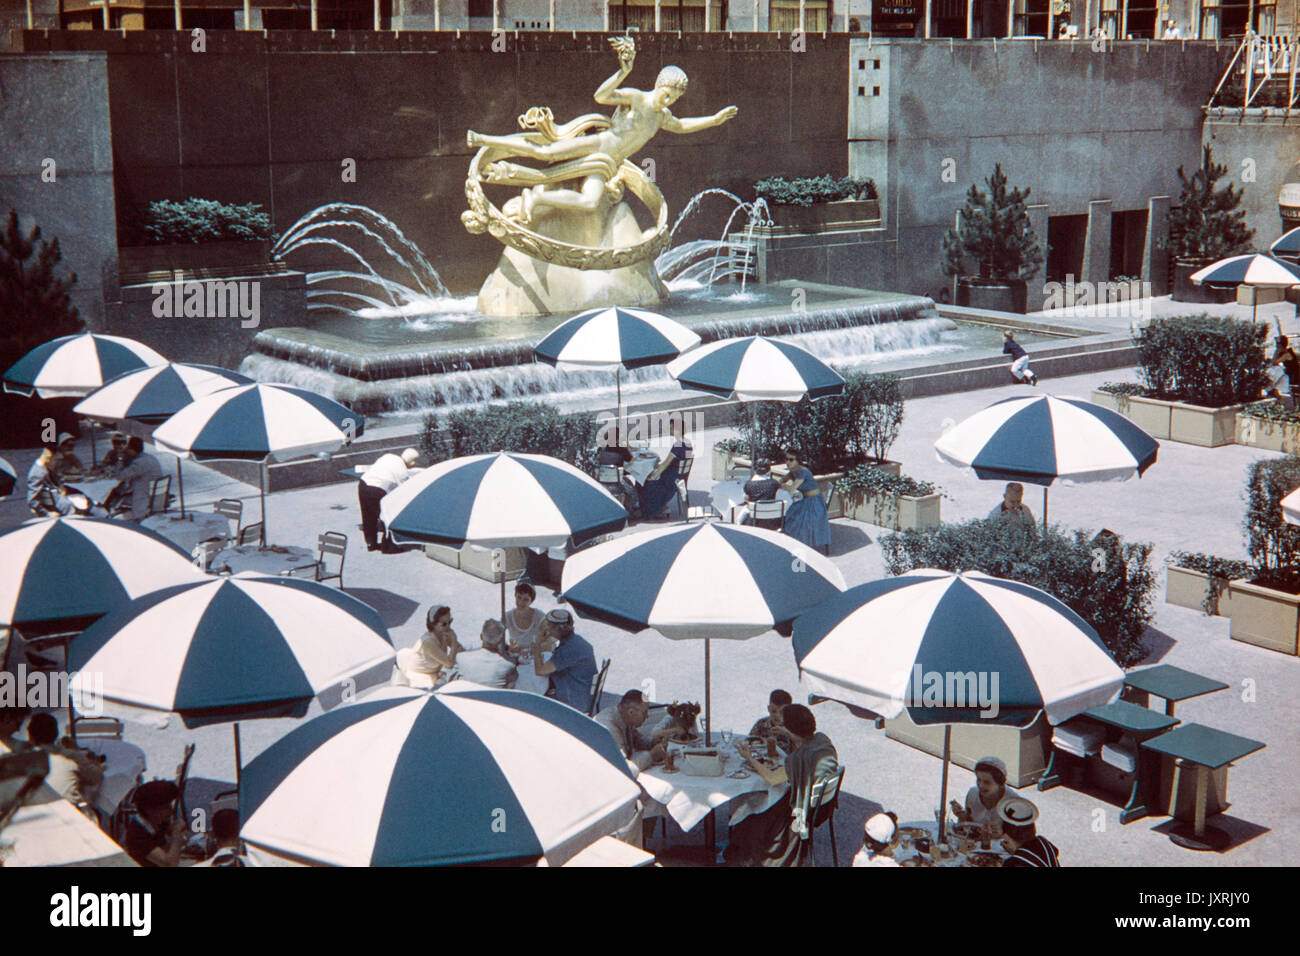 People eating and drinking in The Lower Plaza of the Rockefeller Centre, New York, in 1956. Image shows fashion of the 1950s period. Statue of Prometheus in the background. Stock Photo